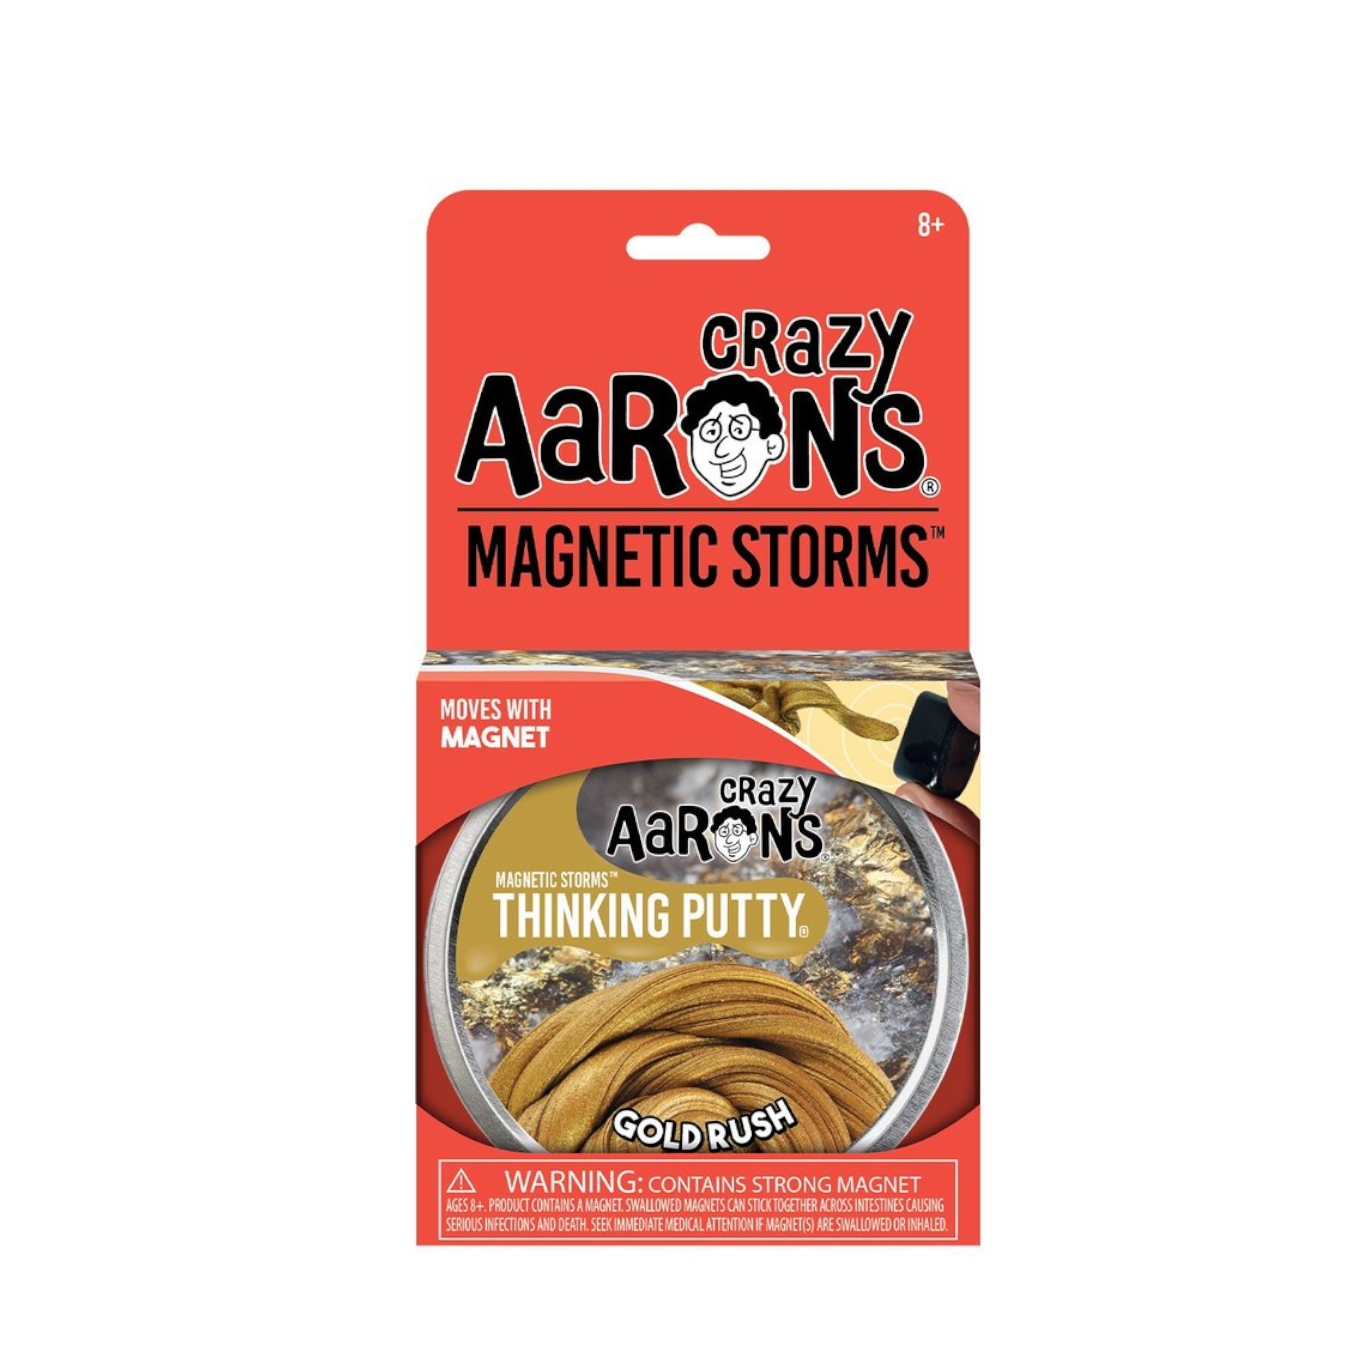 Crazy Aaron's Thinking Putty Honey Hive Silicone in Clear and Gold